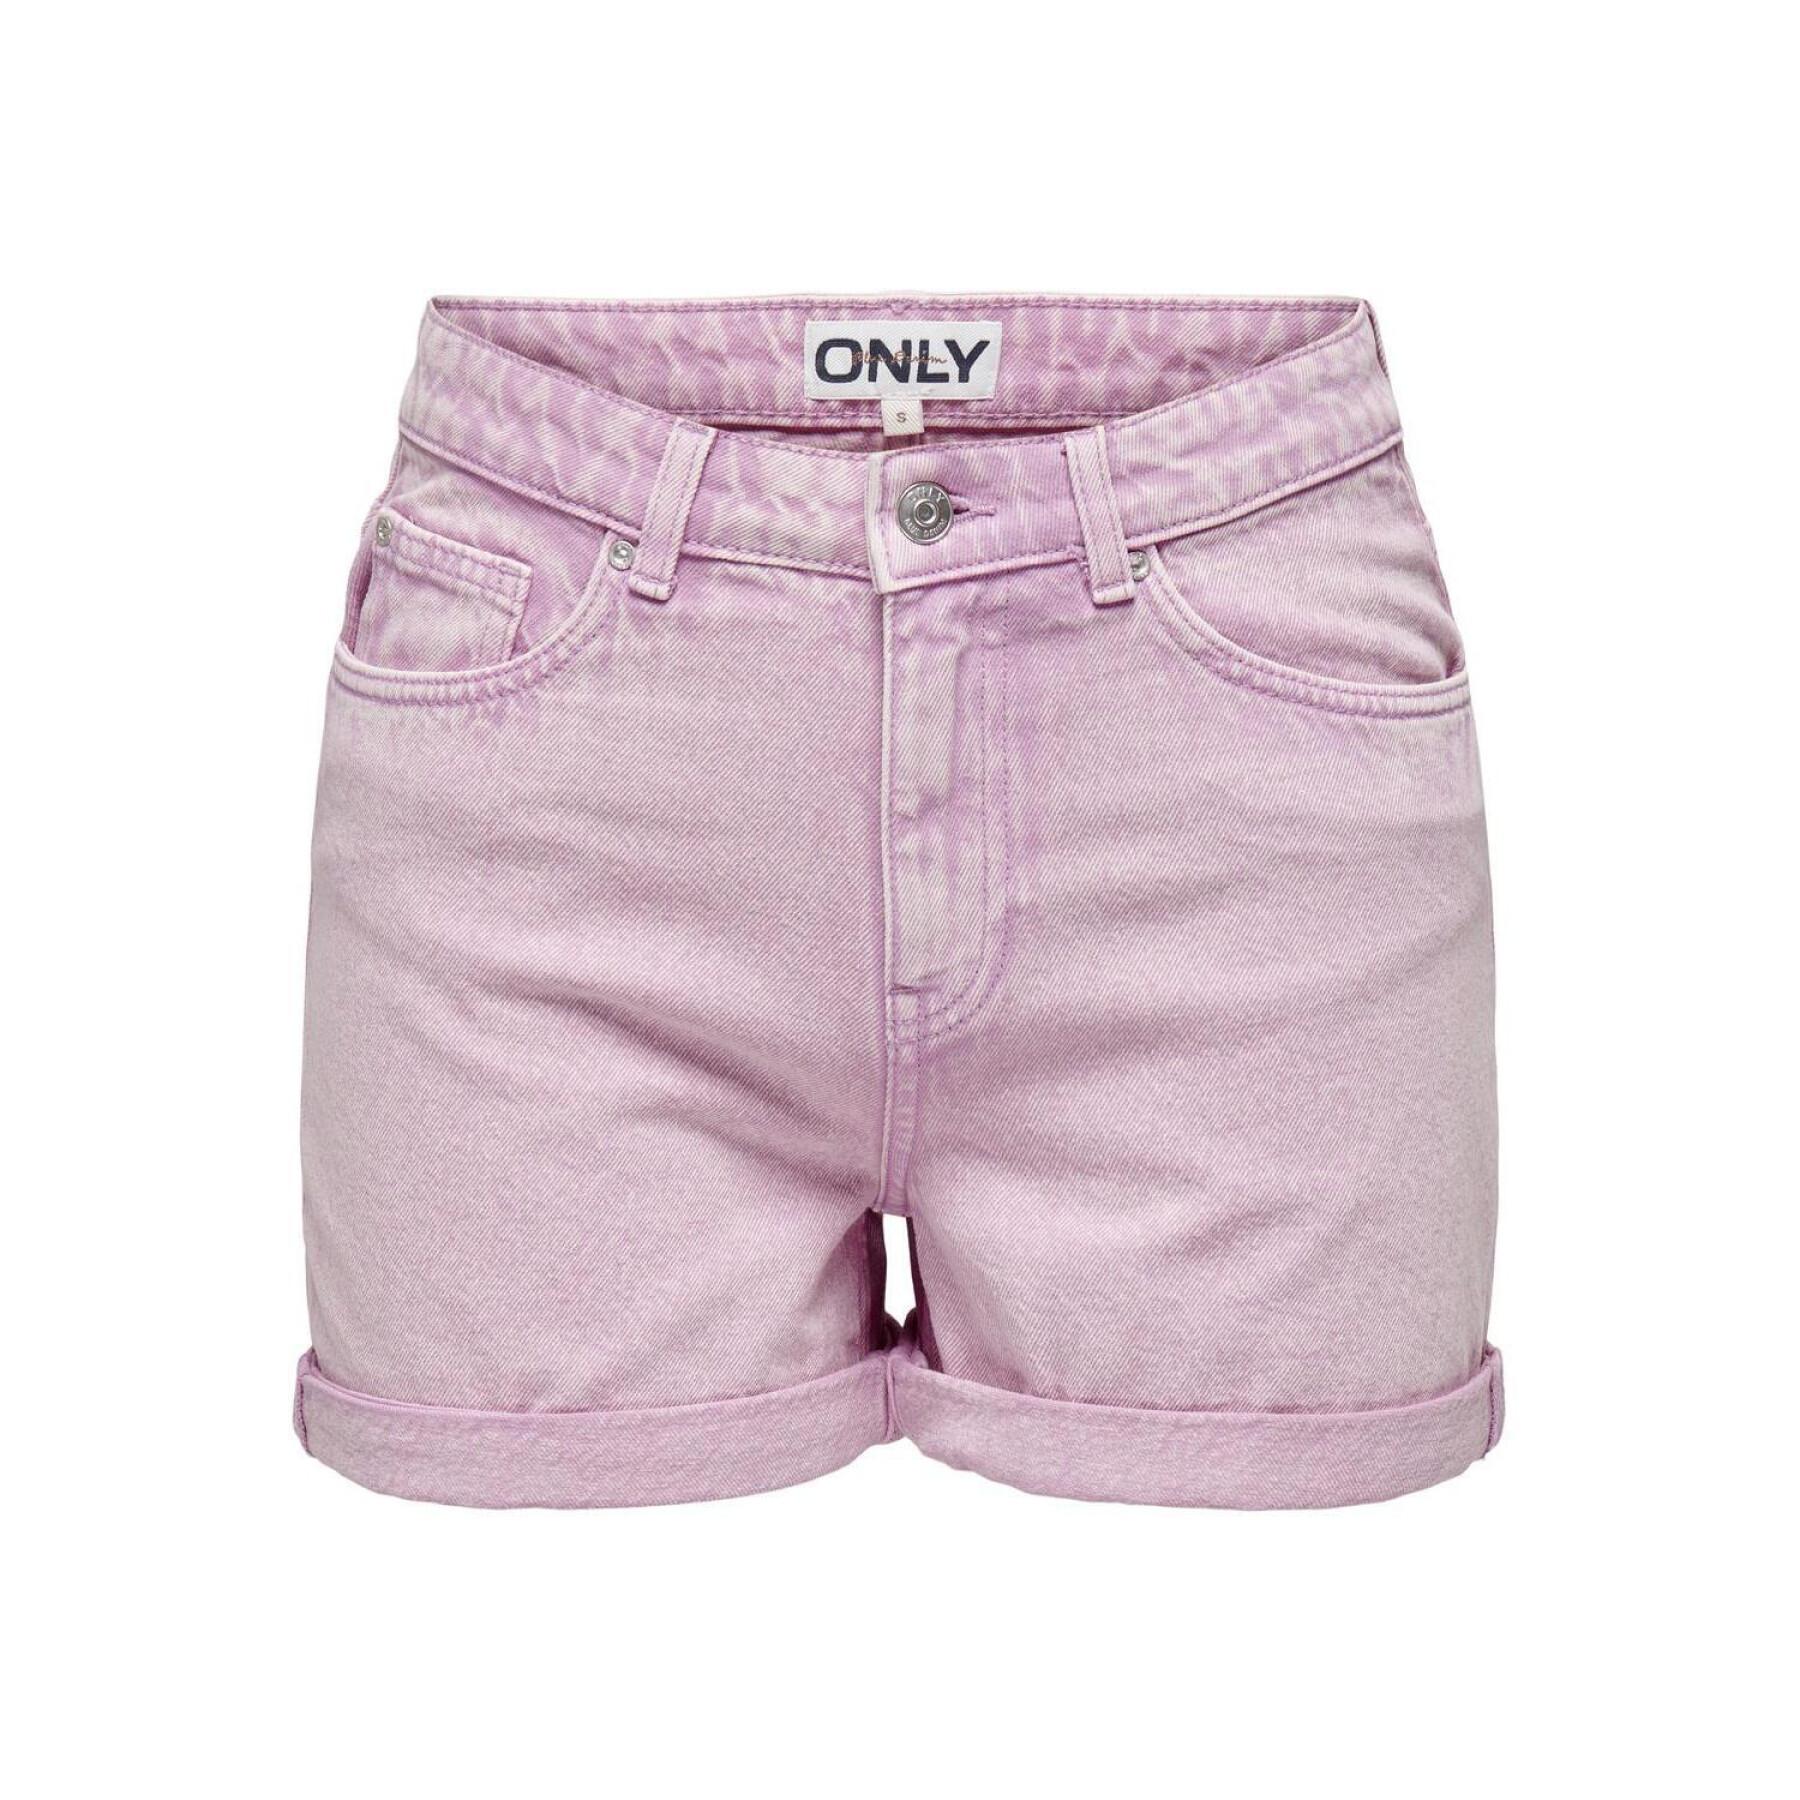 Women's shorts Only Phine-Everly